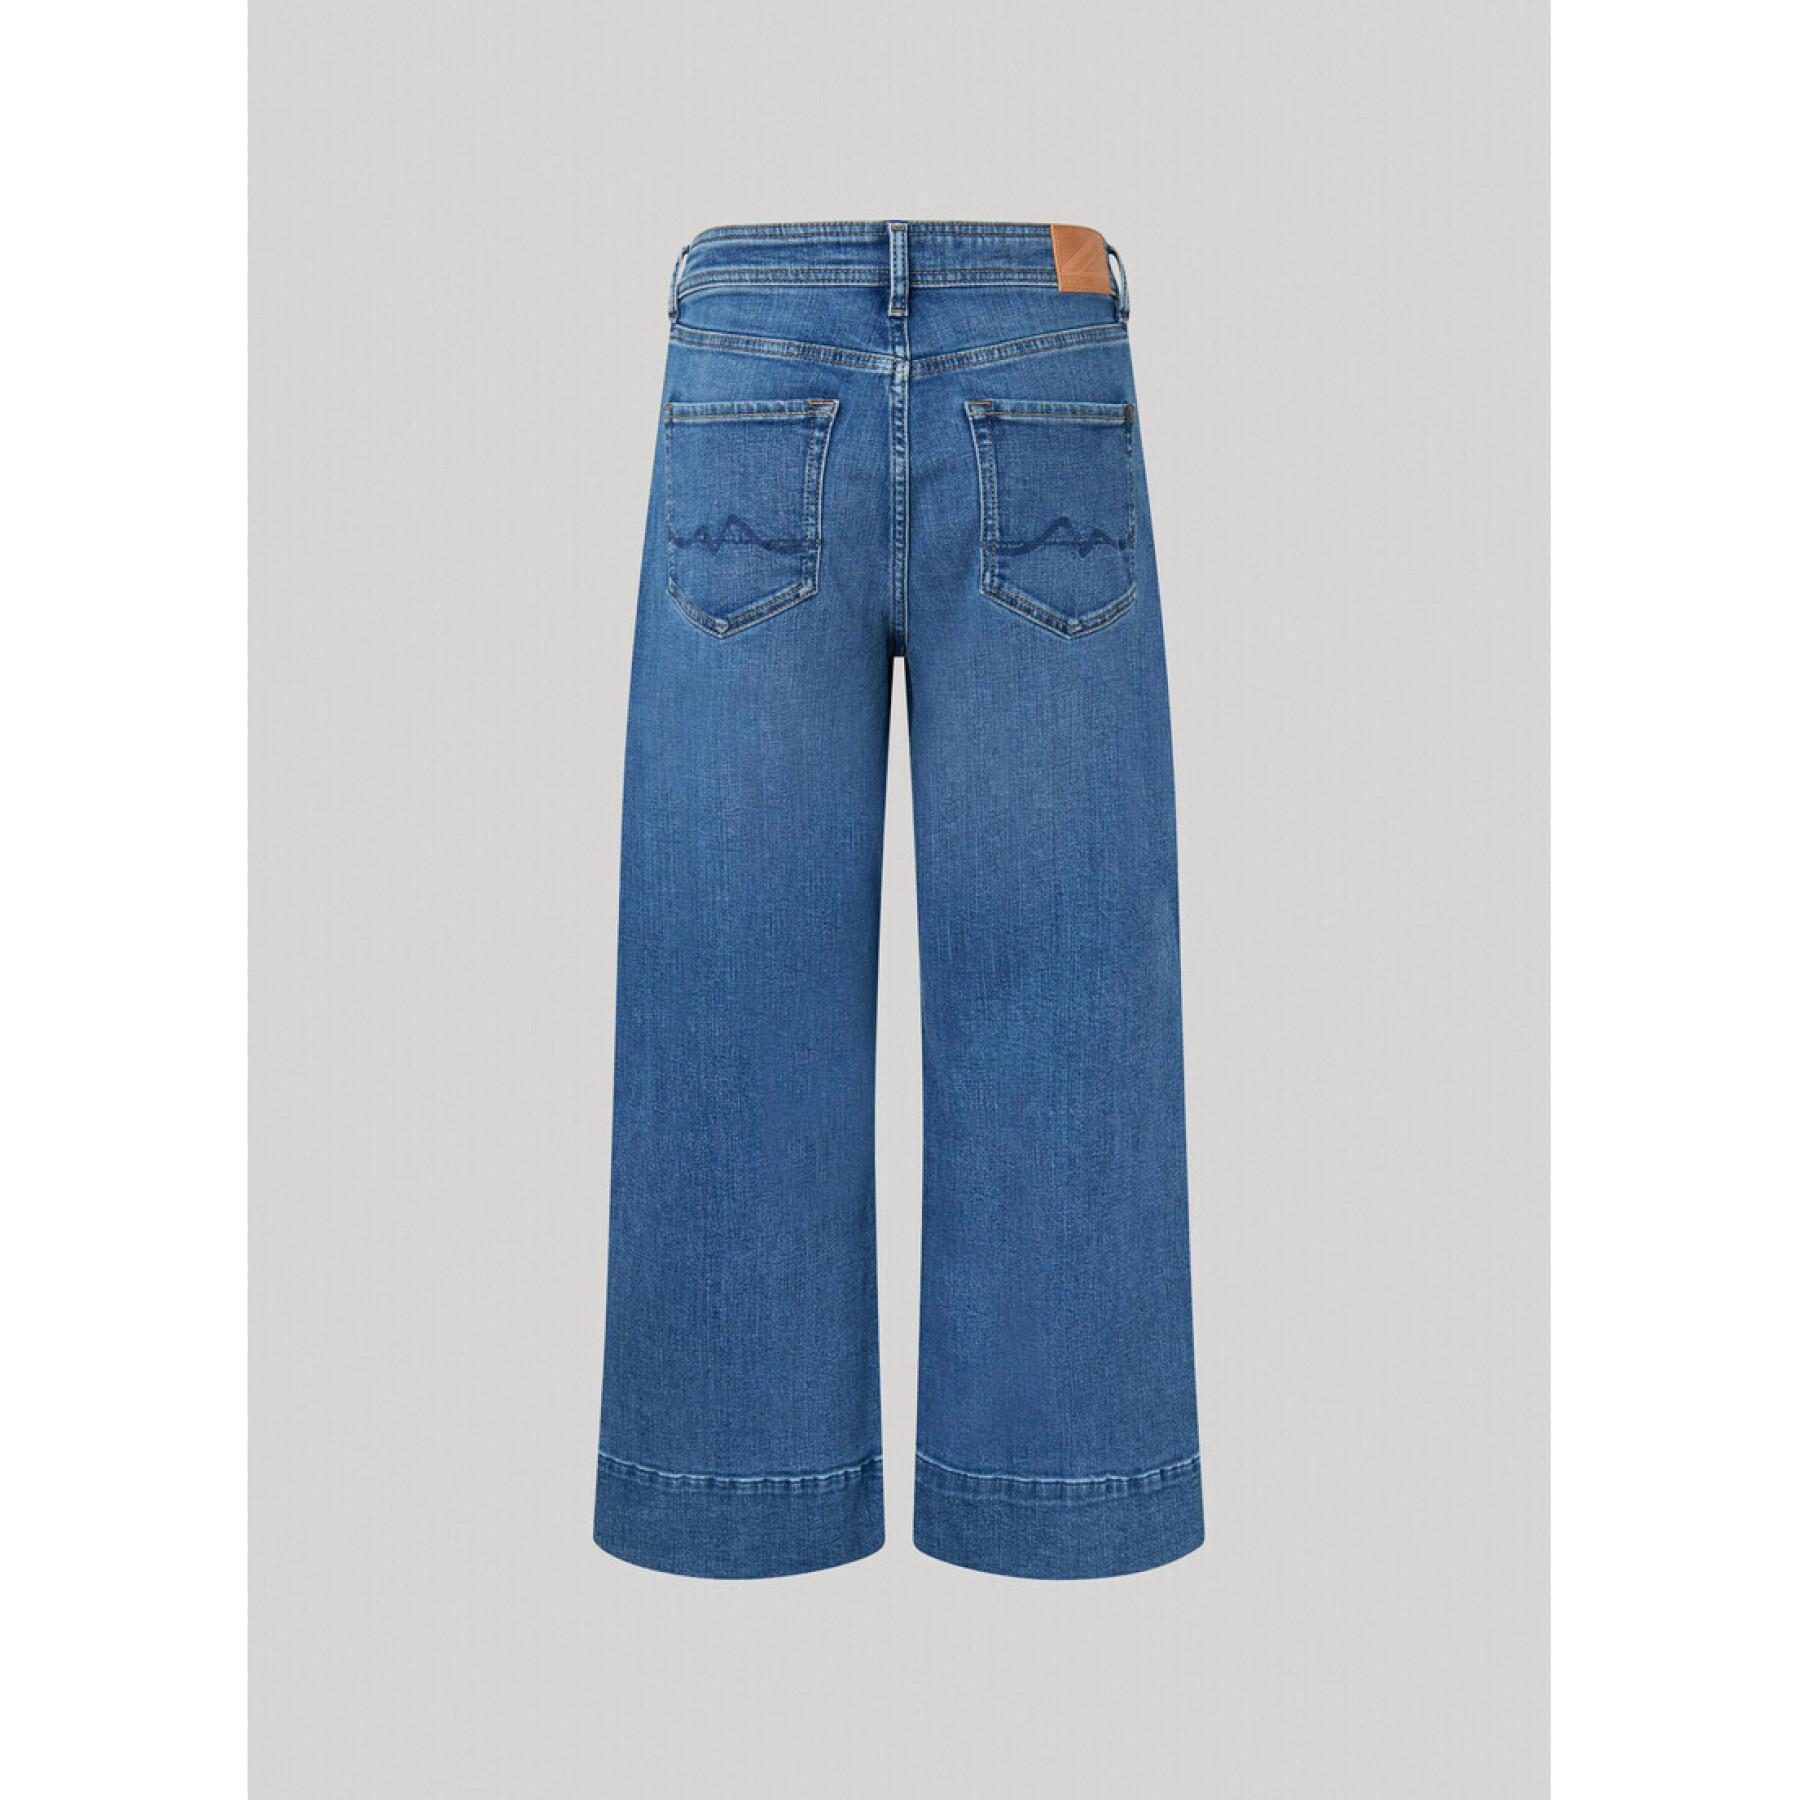 Women's jeans Pepe Jeans Lucy